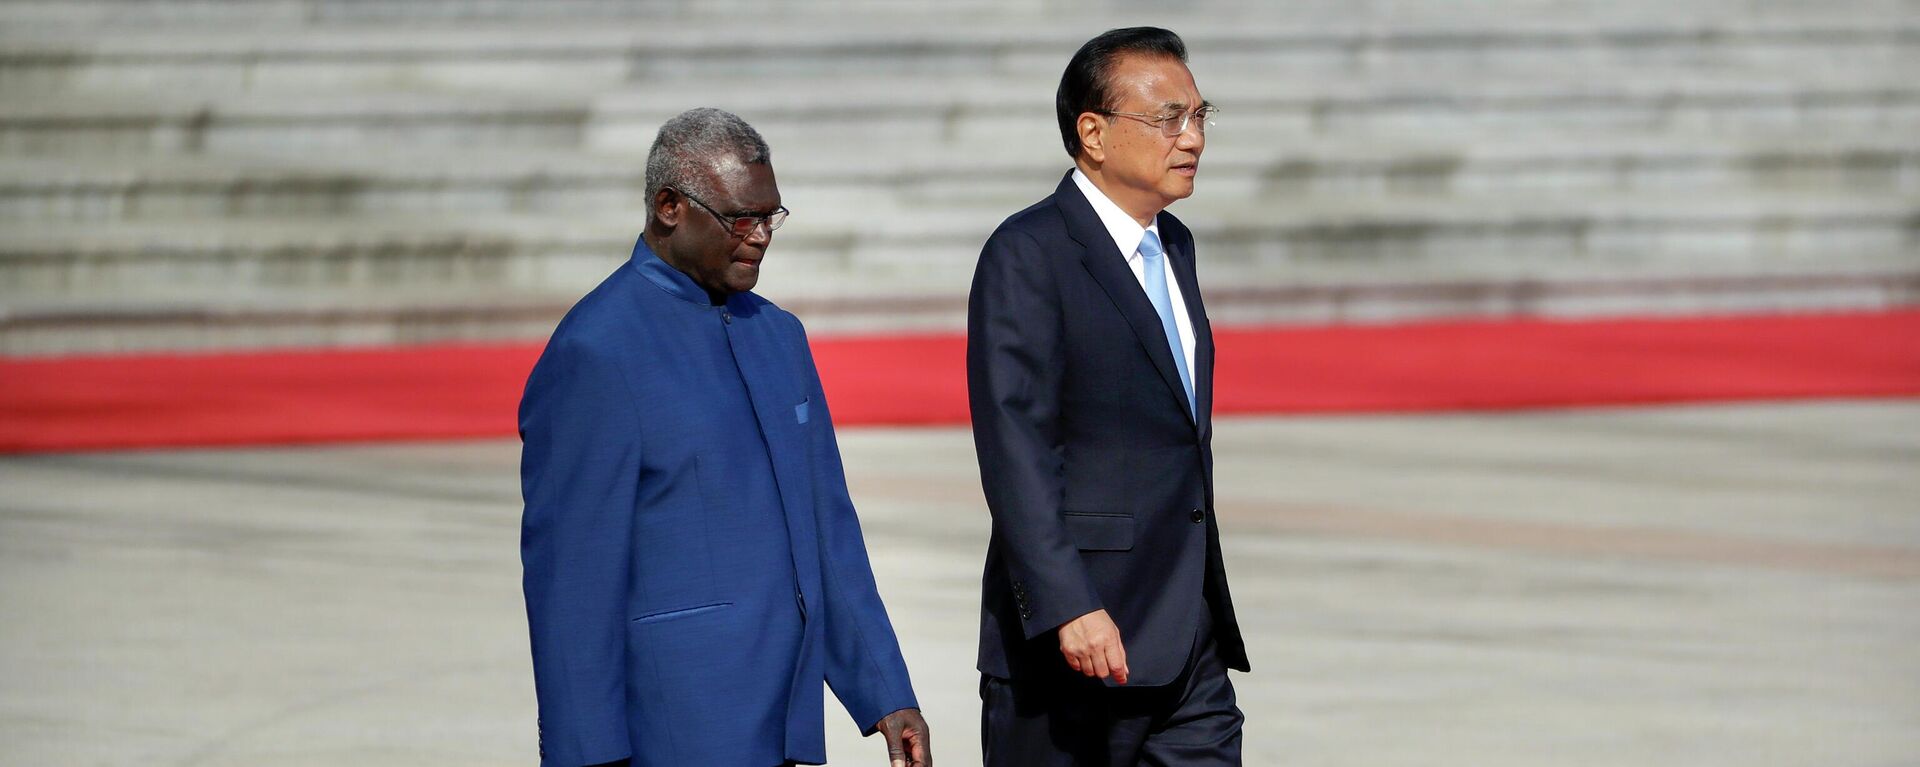 Solomon Islands Prime Minister Manasseh Sogavare, left, walks with Chinese Premier Li Keqiang during a welcome ceremony at the Great Hall of the People in Beijing, Wednesday, Oct. 9, 2019. - Sputnik International, 1920, 06.05.2022